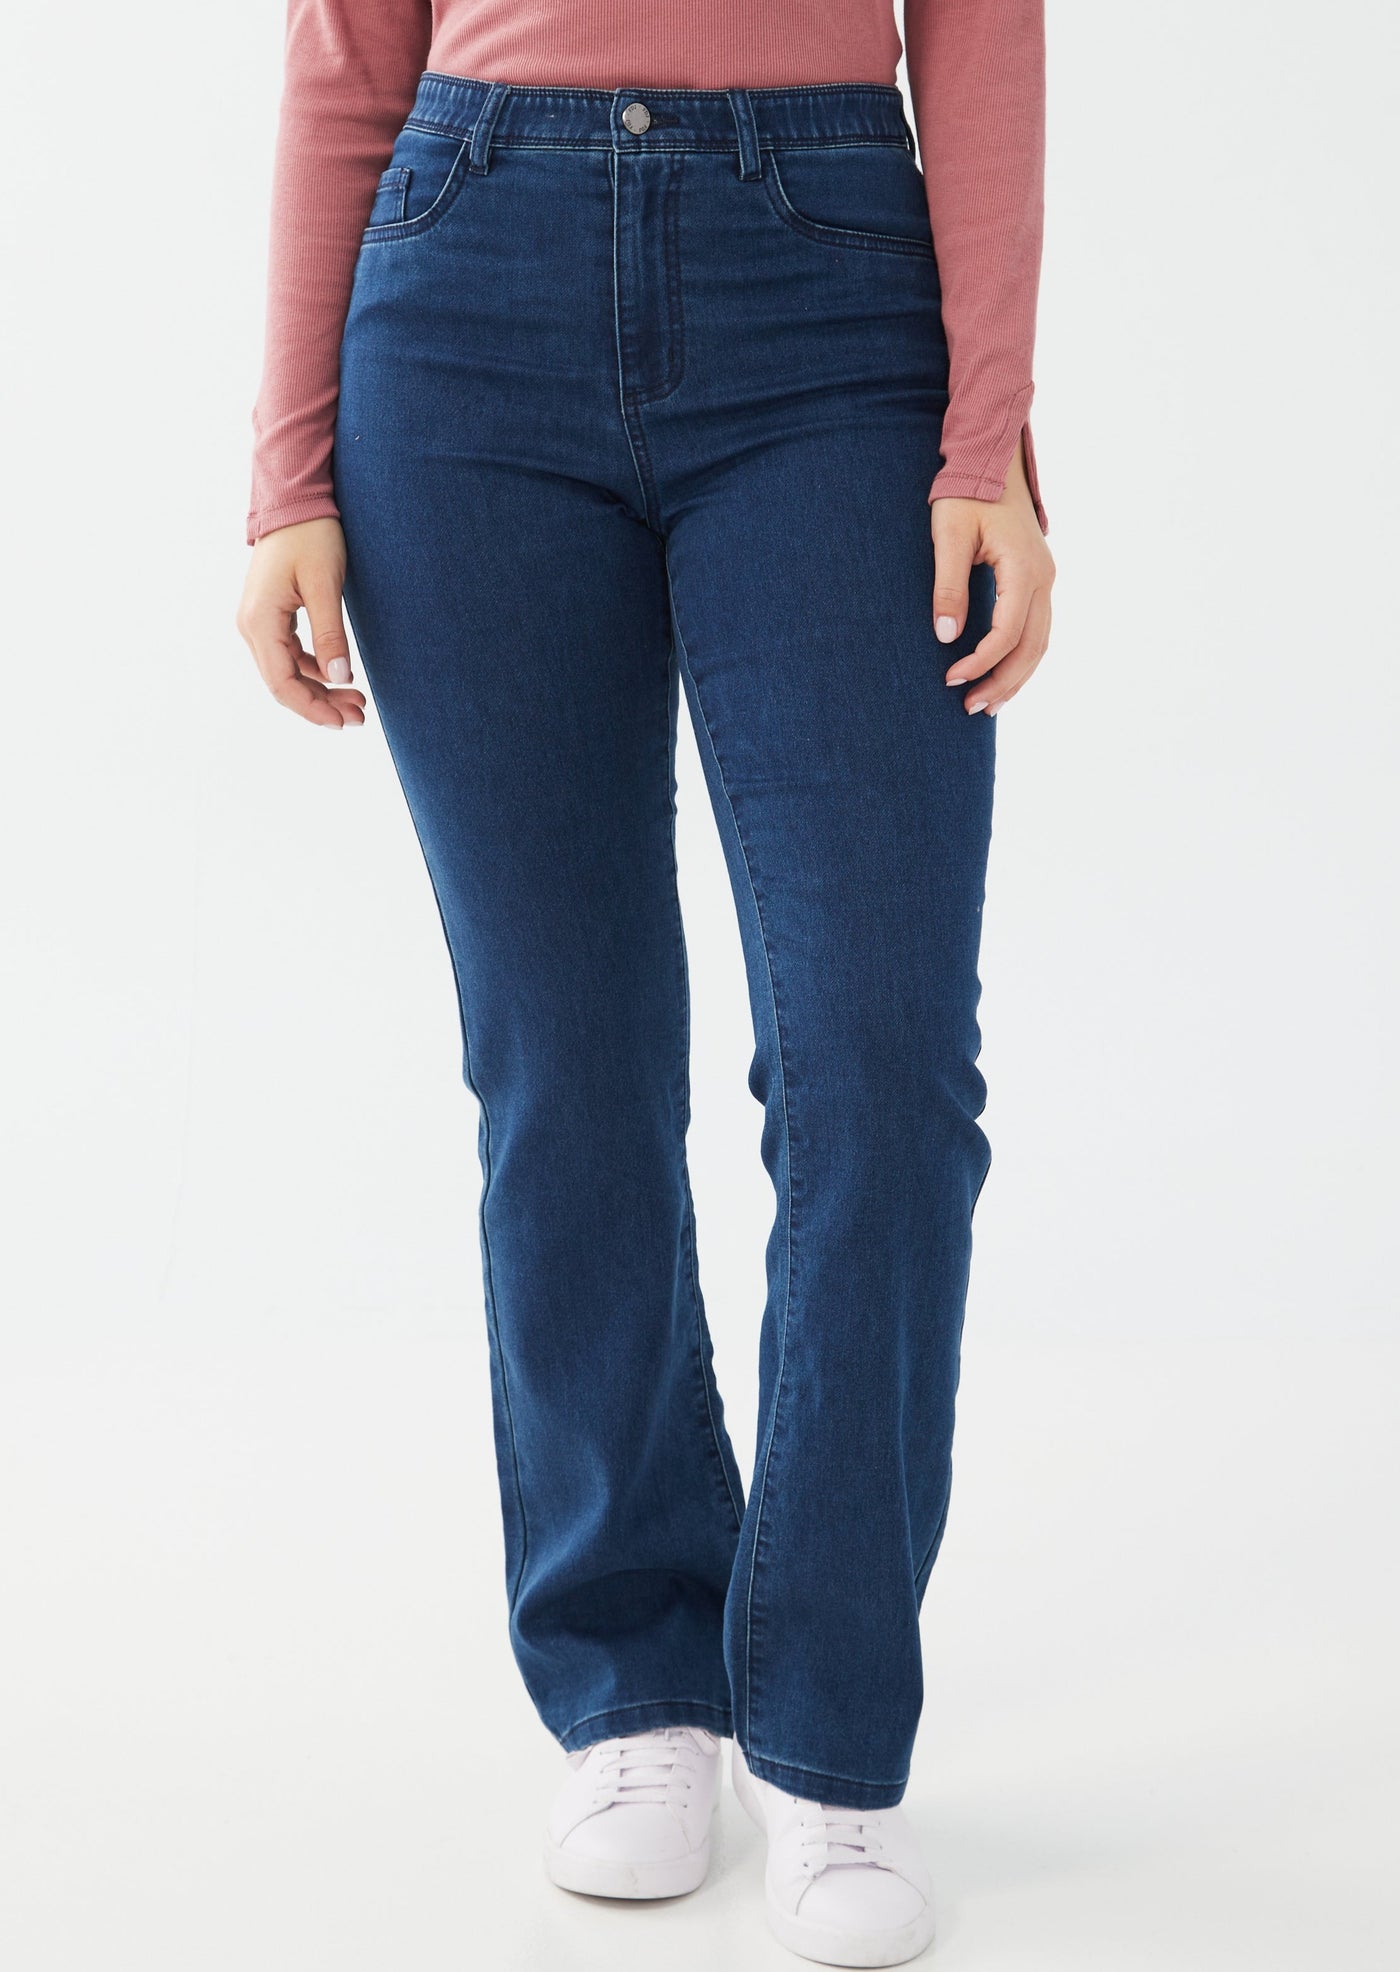 French Dressing Jeans - Suzanne Bootleg - Petite